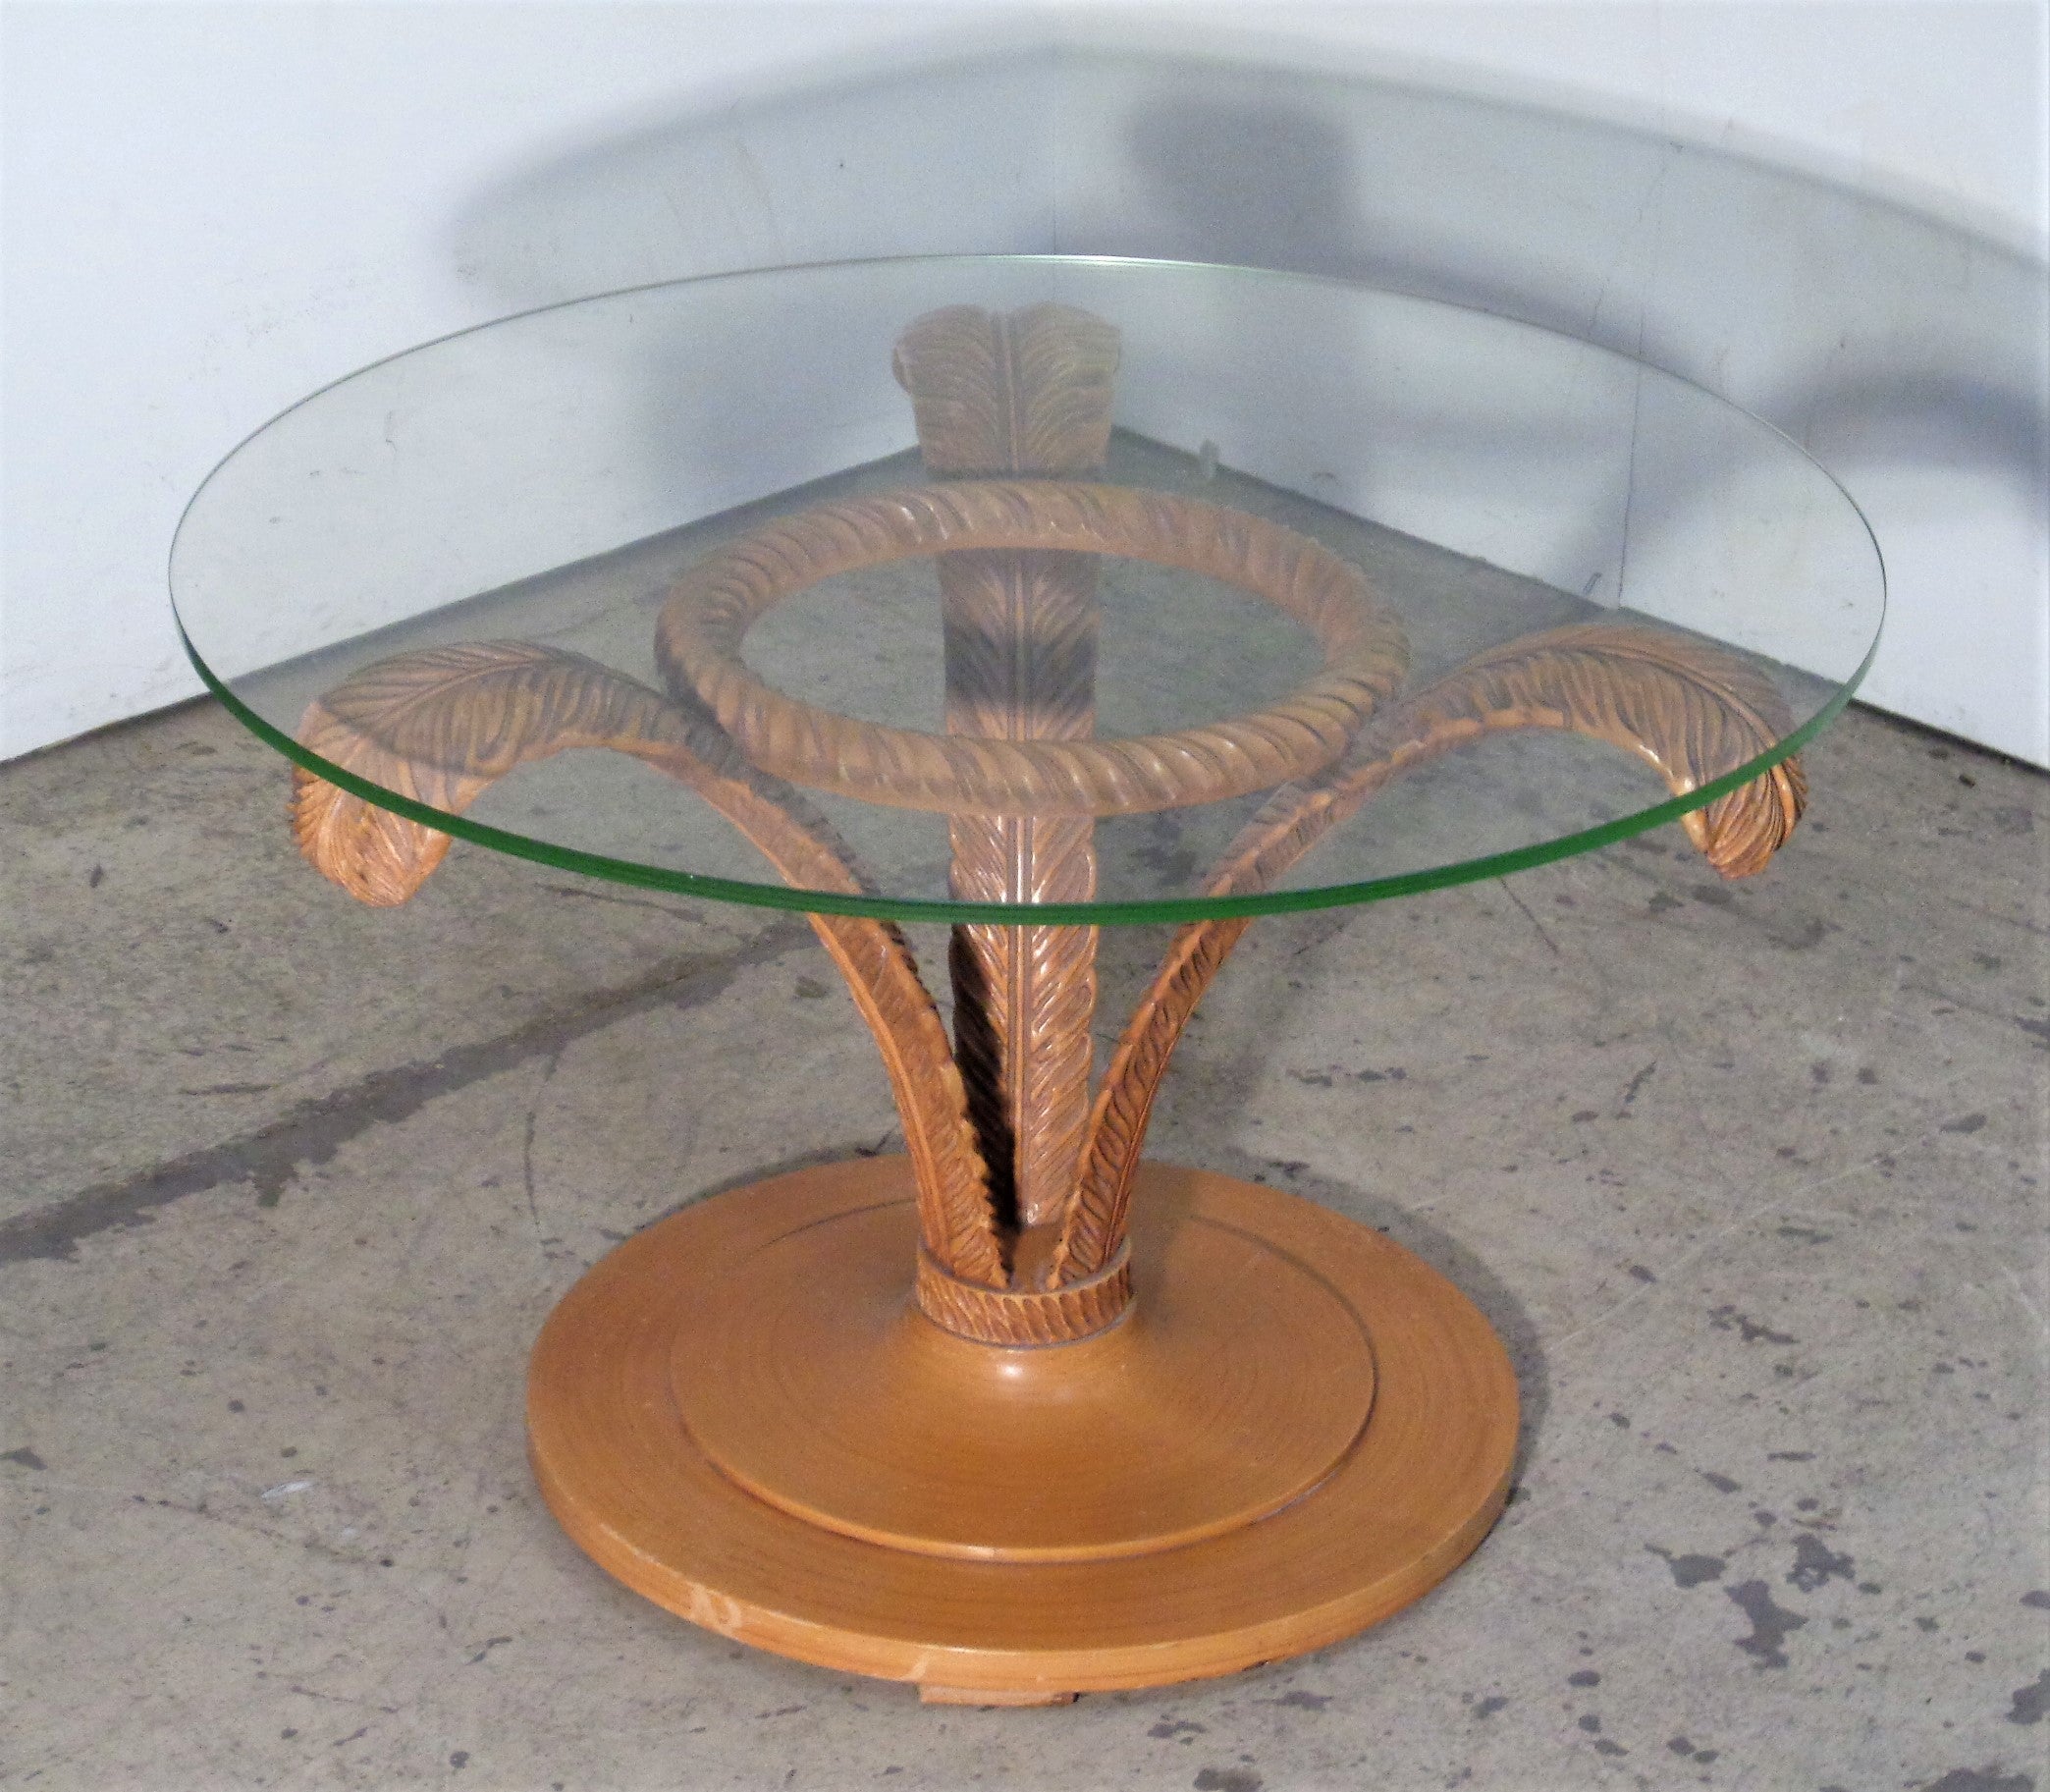 Grosfeld House carved wood plume table with original glazed finish, circa 1940. 29 1/2